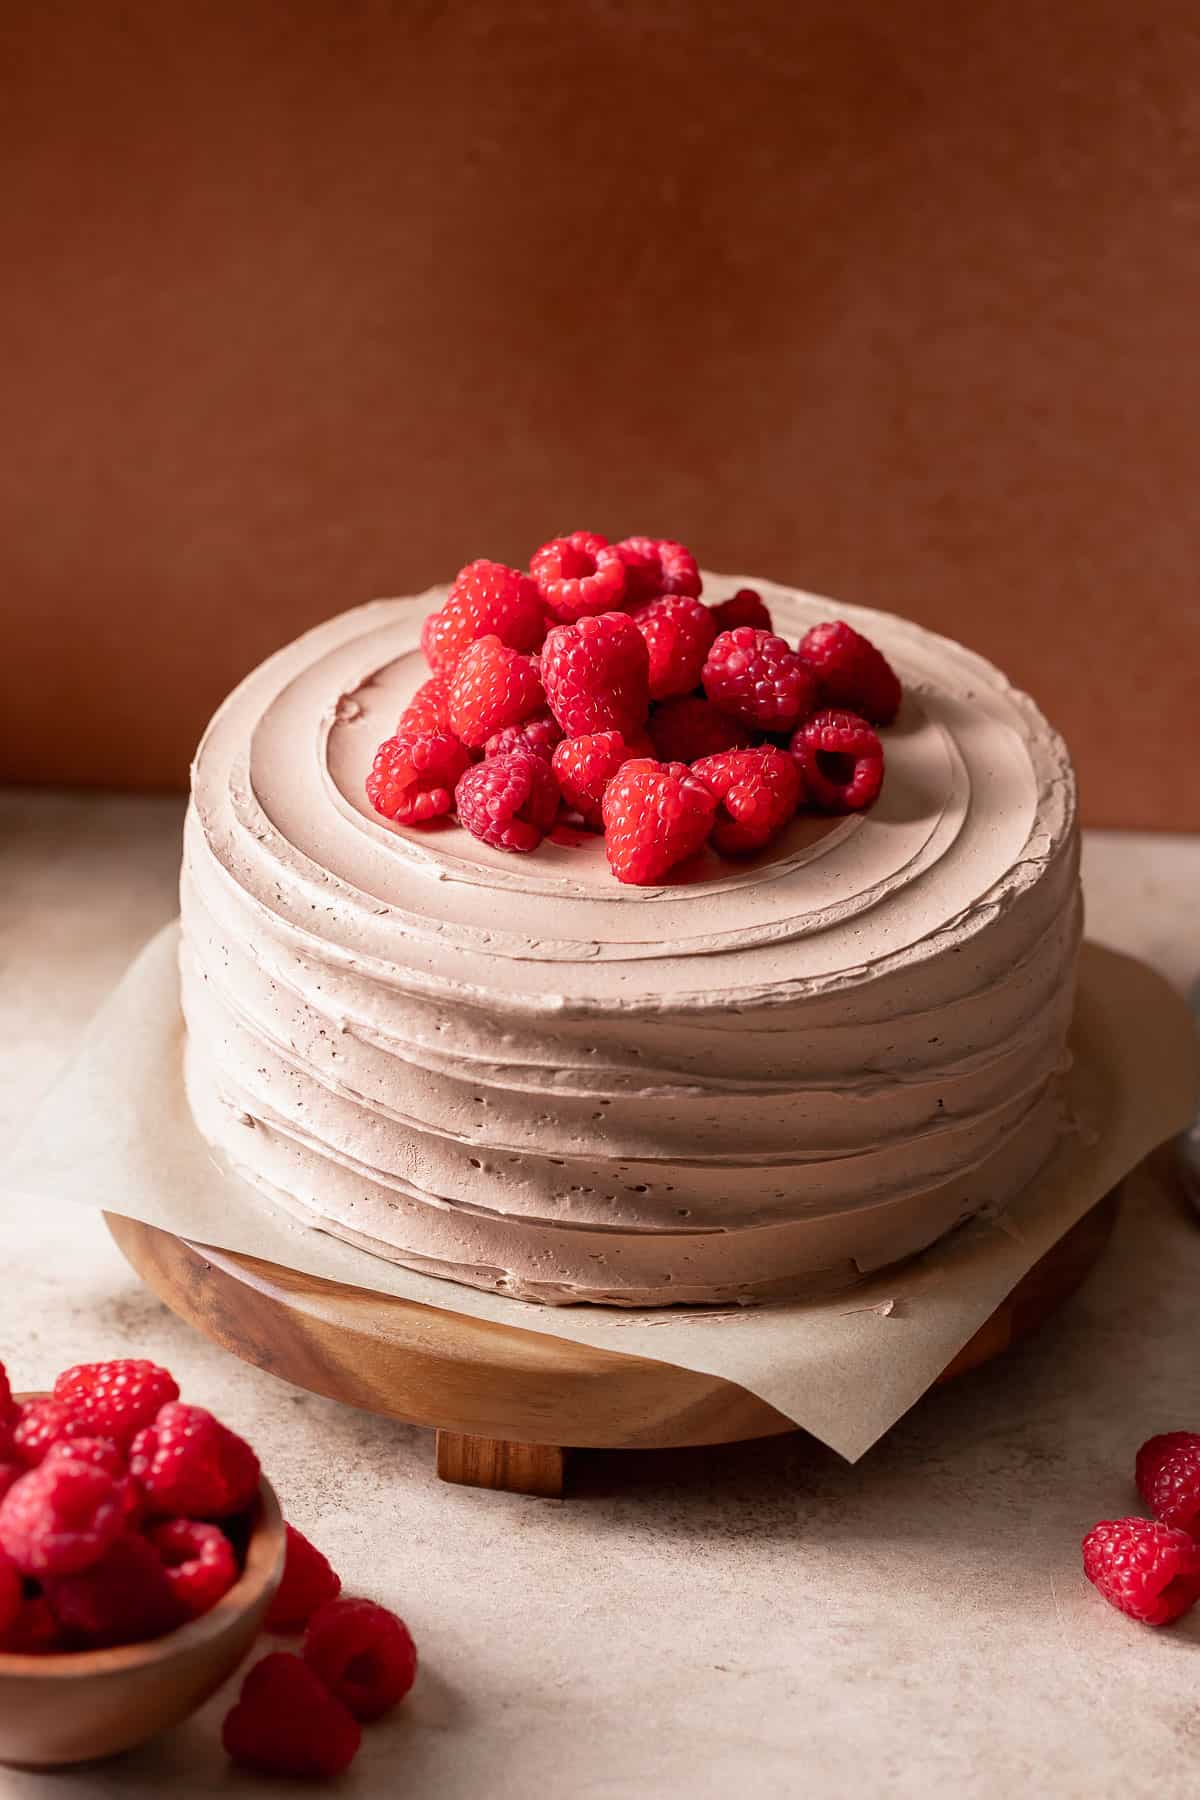 Chocolate raspberry cake with fresh raspberries on top on a wooden cake stand.